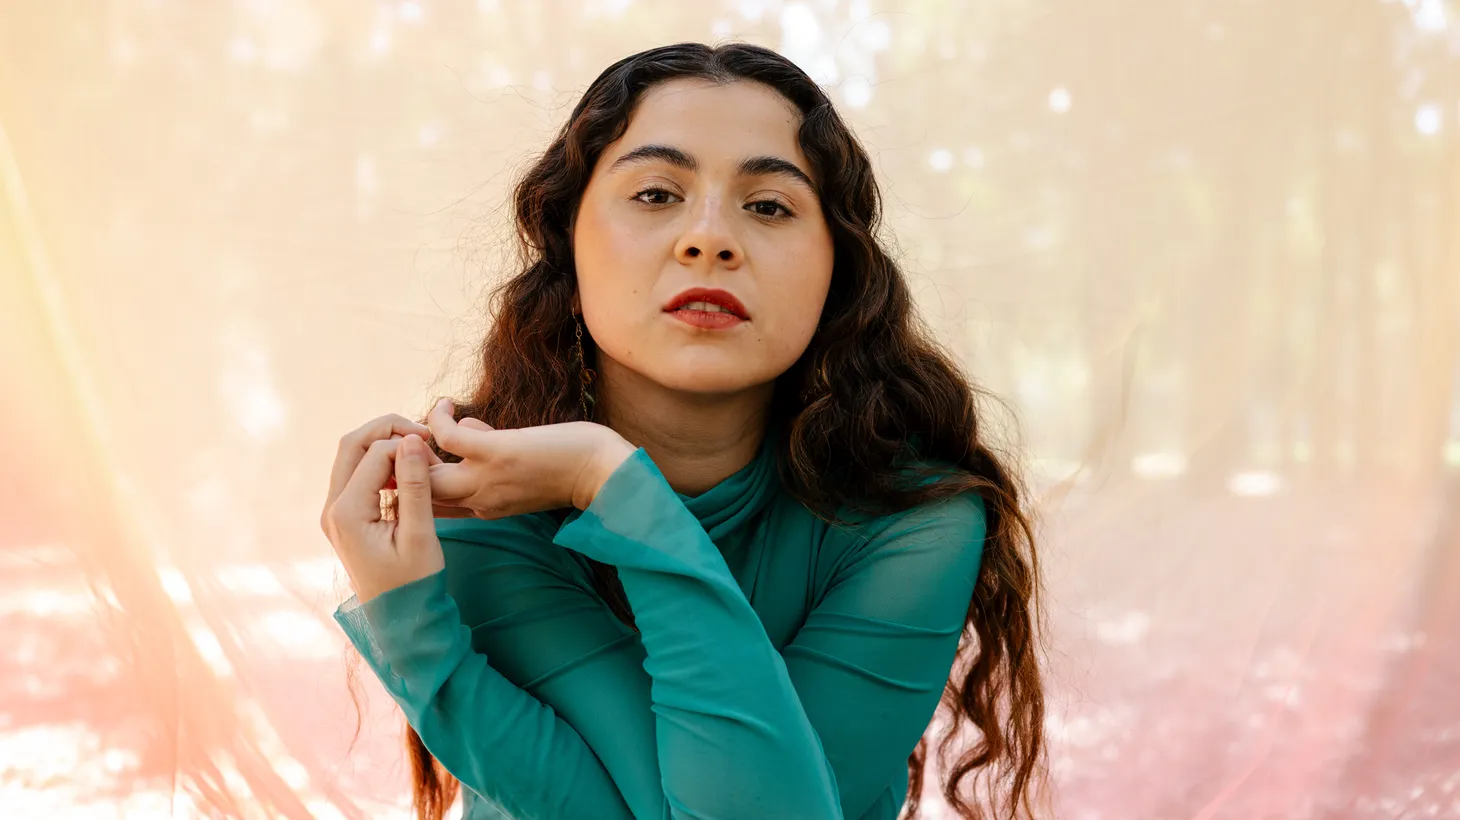 “Best New Artist” at the Latin Grammys this year went to Mexican indie star Silvana Estrada, and with good reason. A break-out year for this rising talent has included releasing her debut album “Marchita” and sold-out shows across the US.